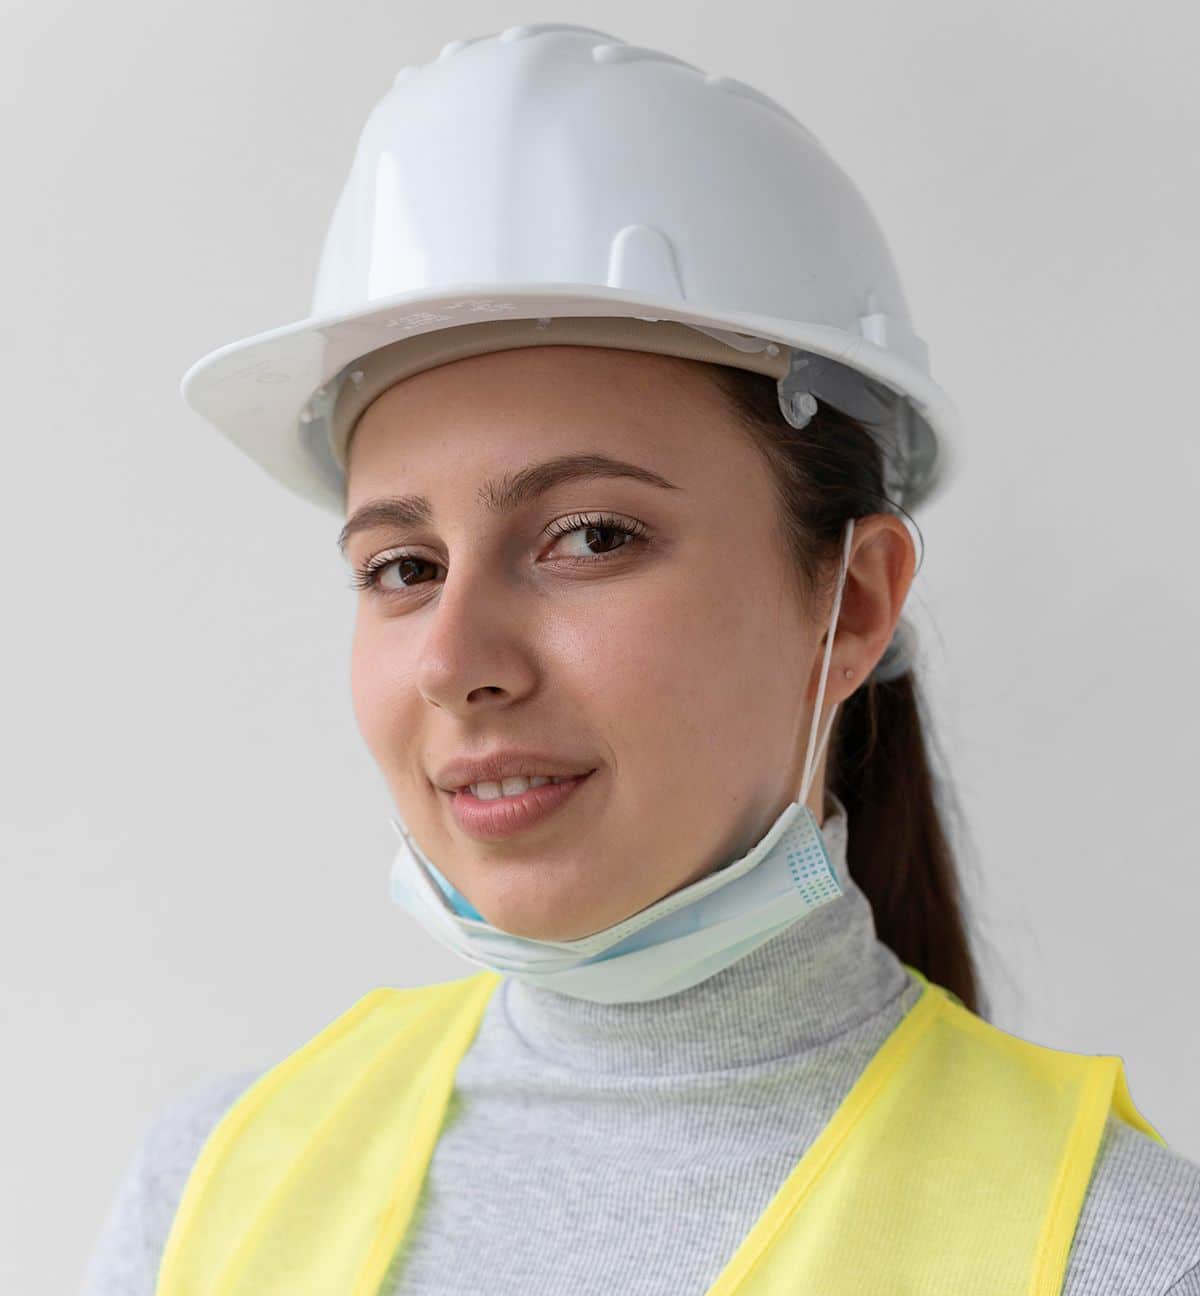 woman-wearing-special-industrial-protective-equipment-10